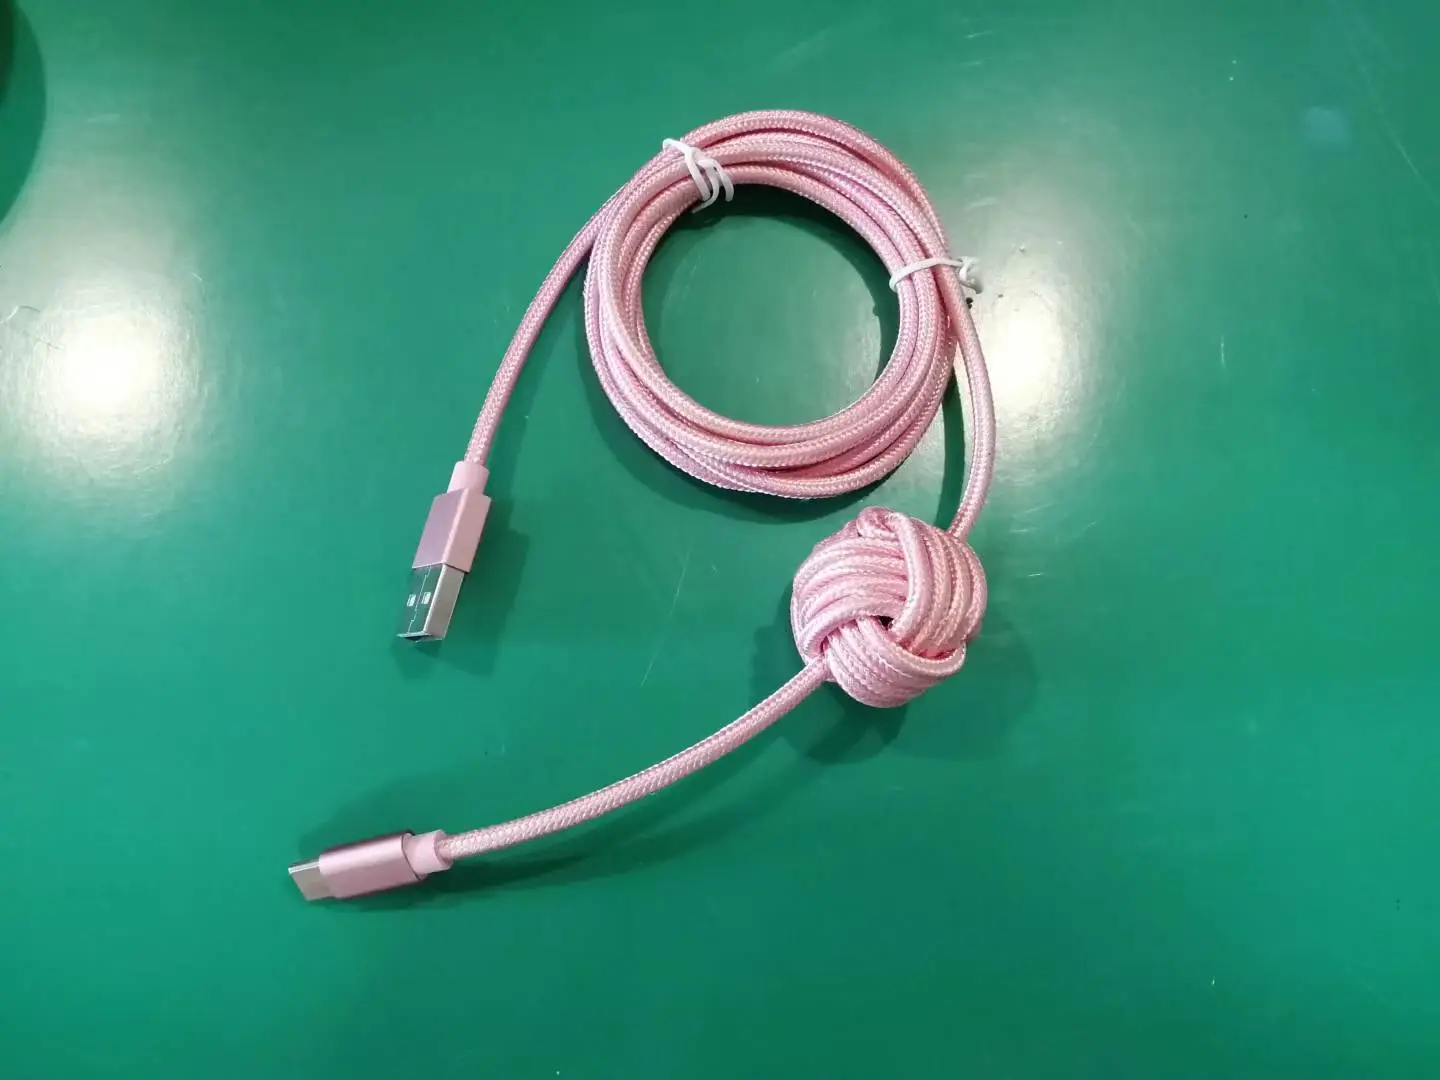 knotted phone cable